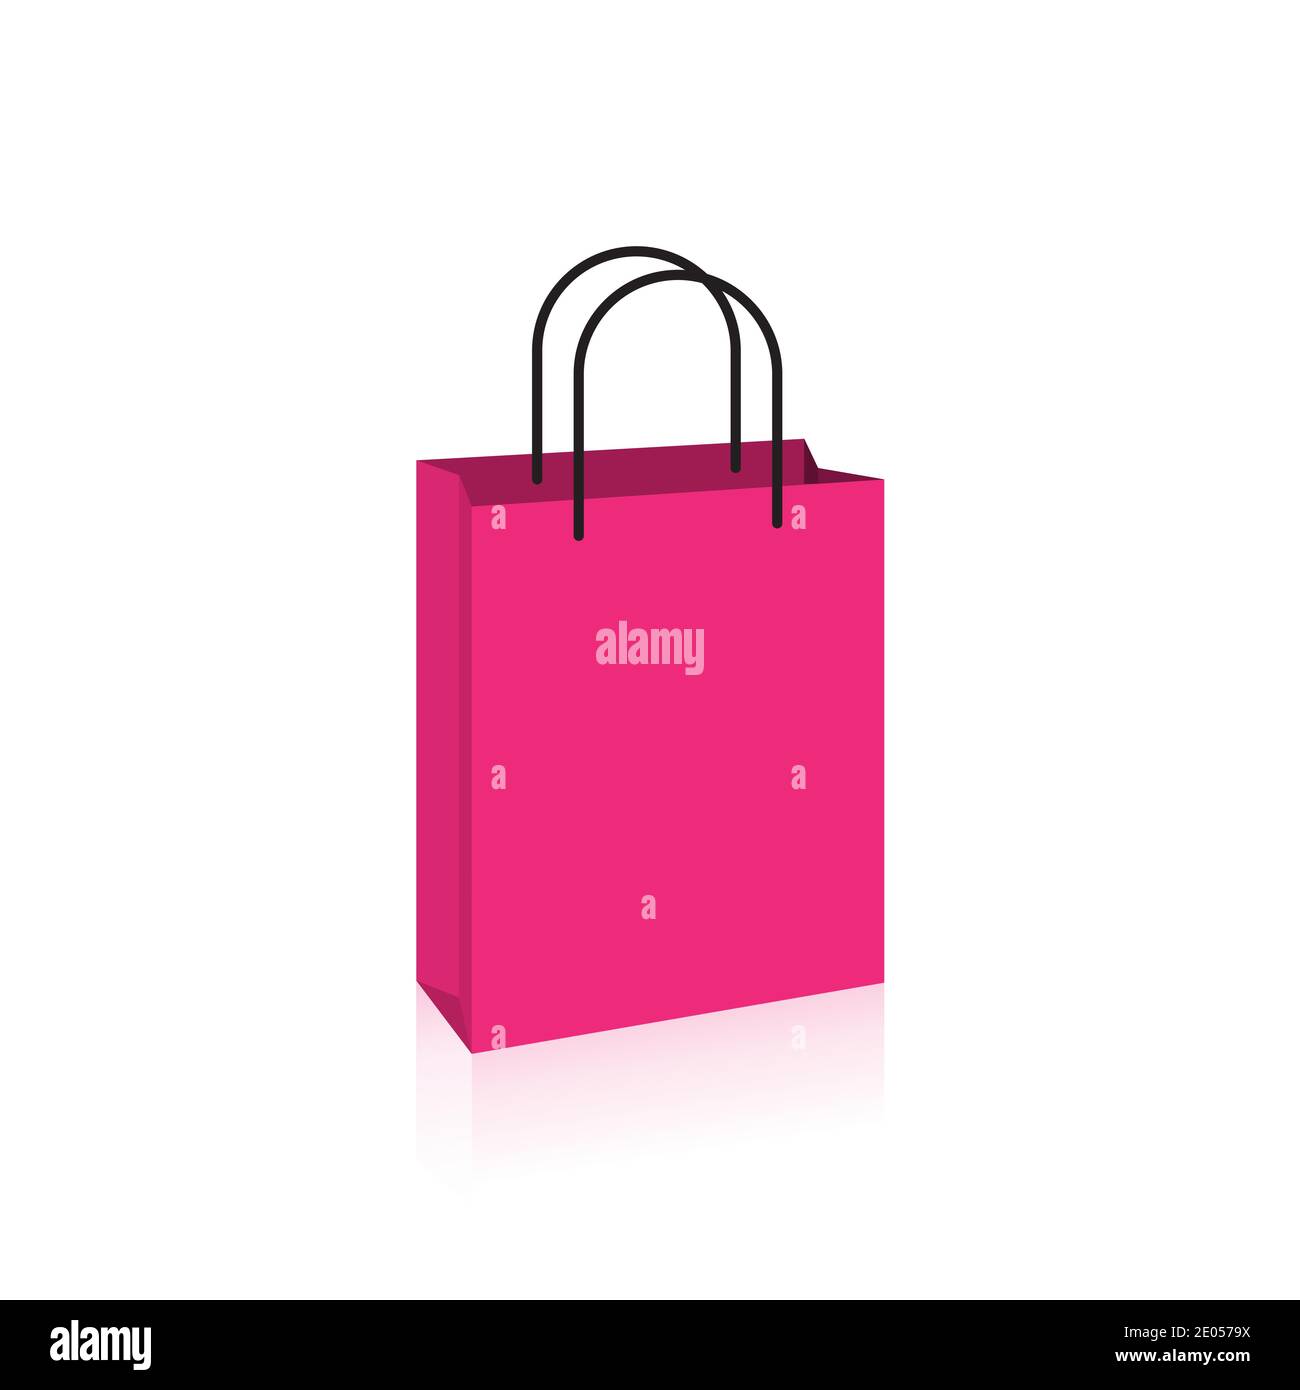 50pcs Small Pink Paper Carry Bags 210x270mm